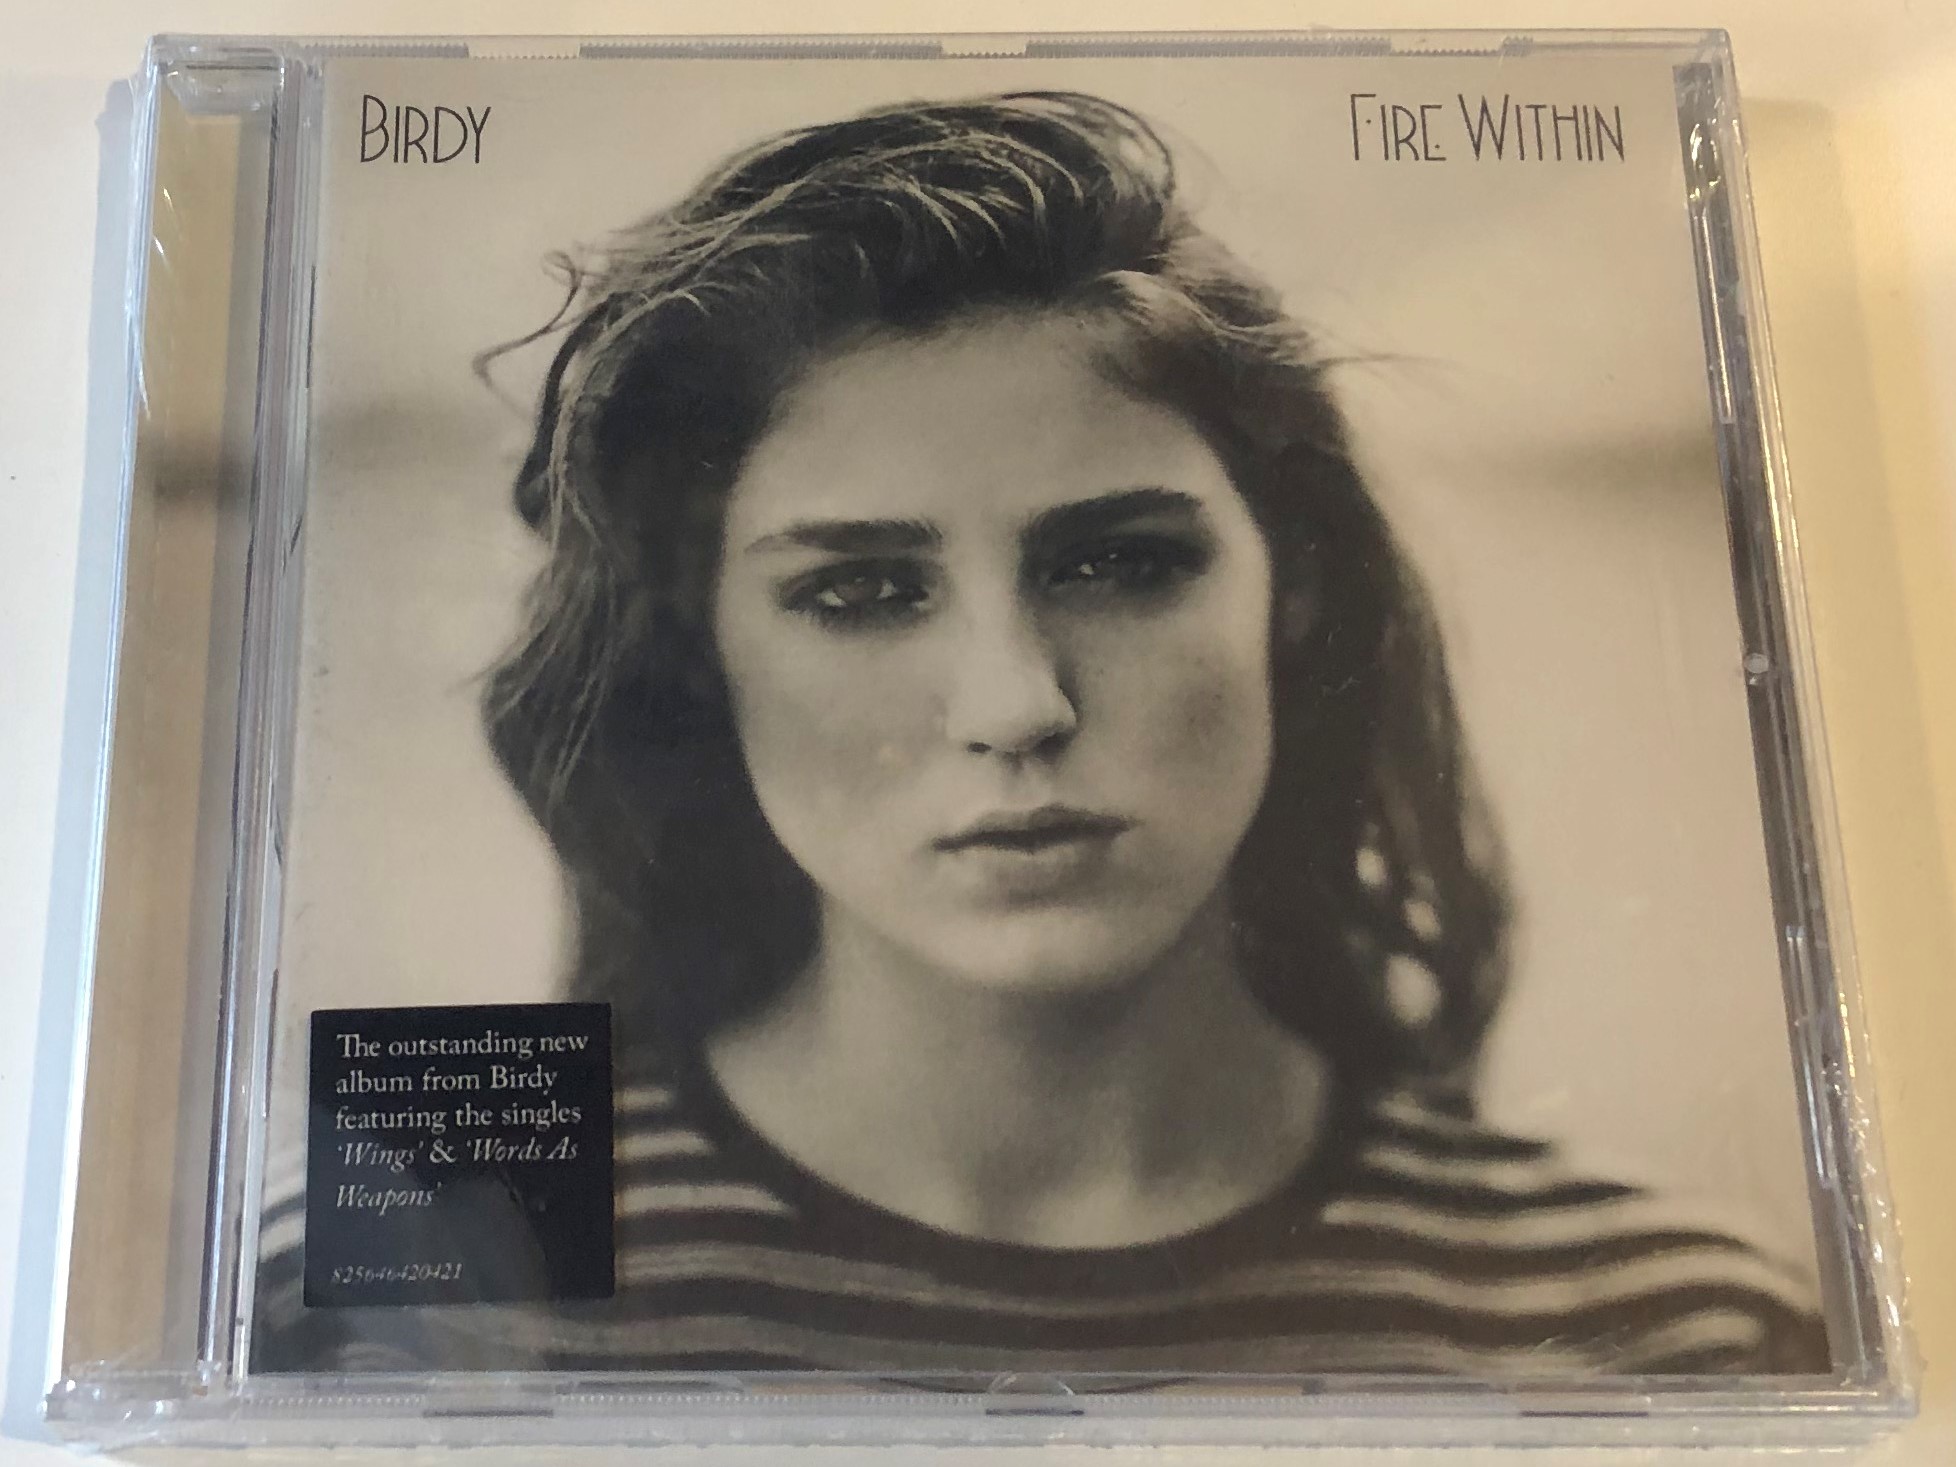 birdy-fire-within-14th-floor-records-audio-cd-2013-825646420421-1-.jpg